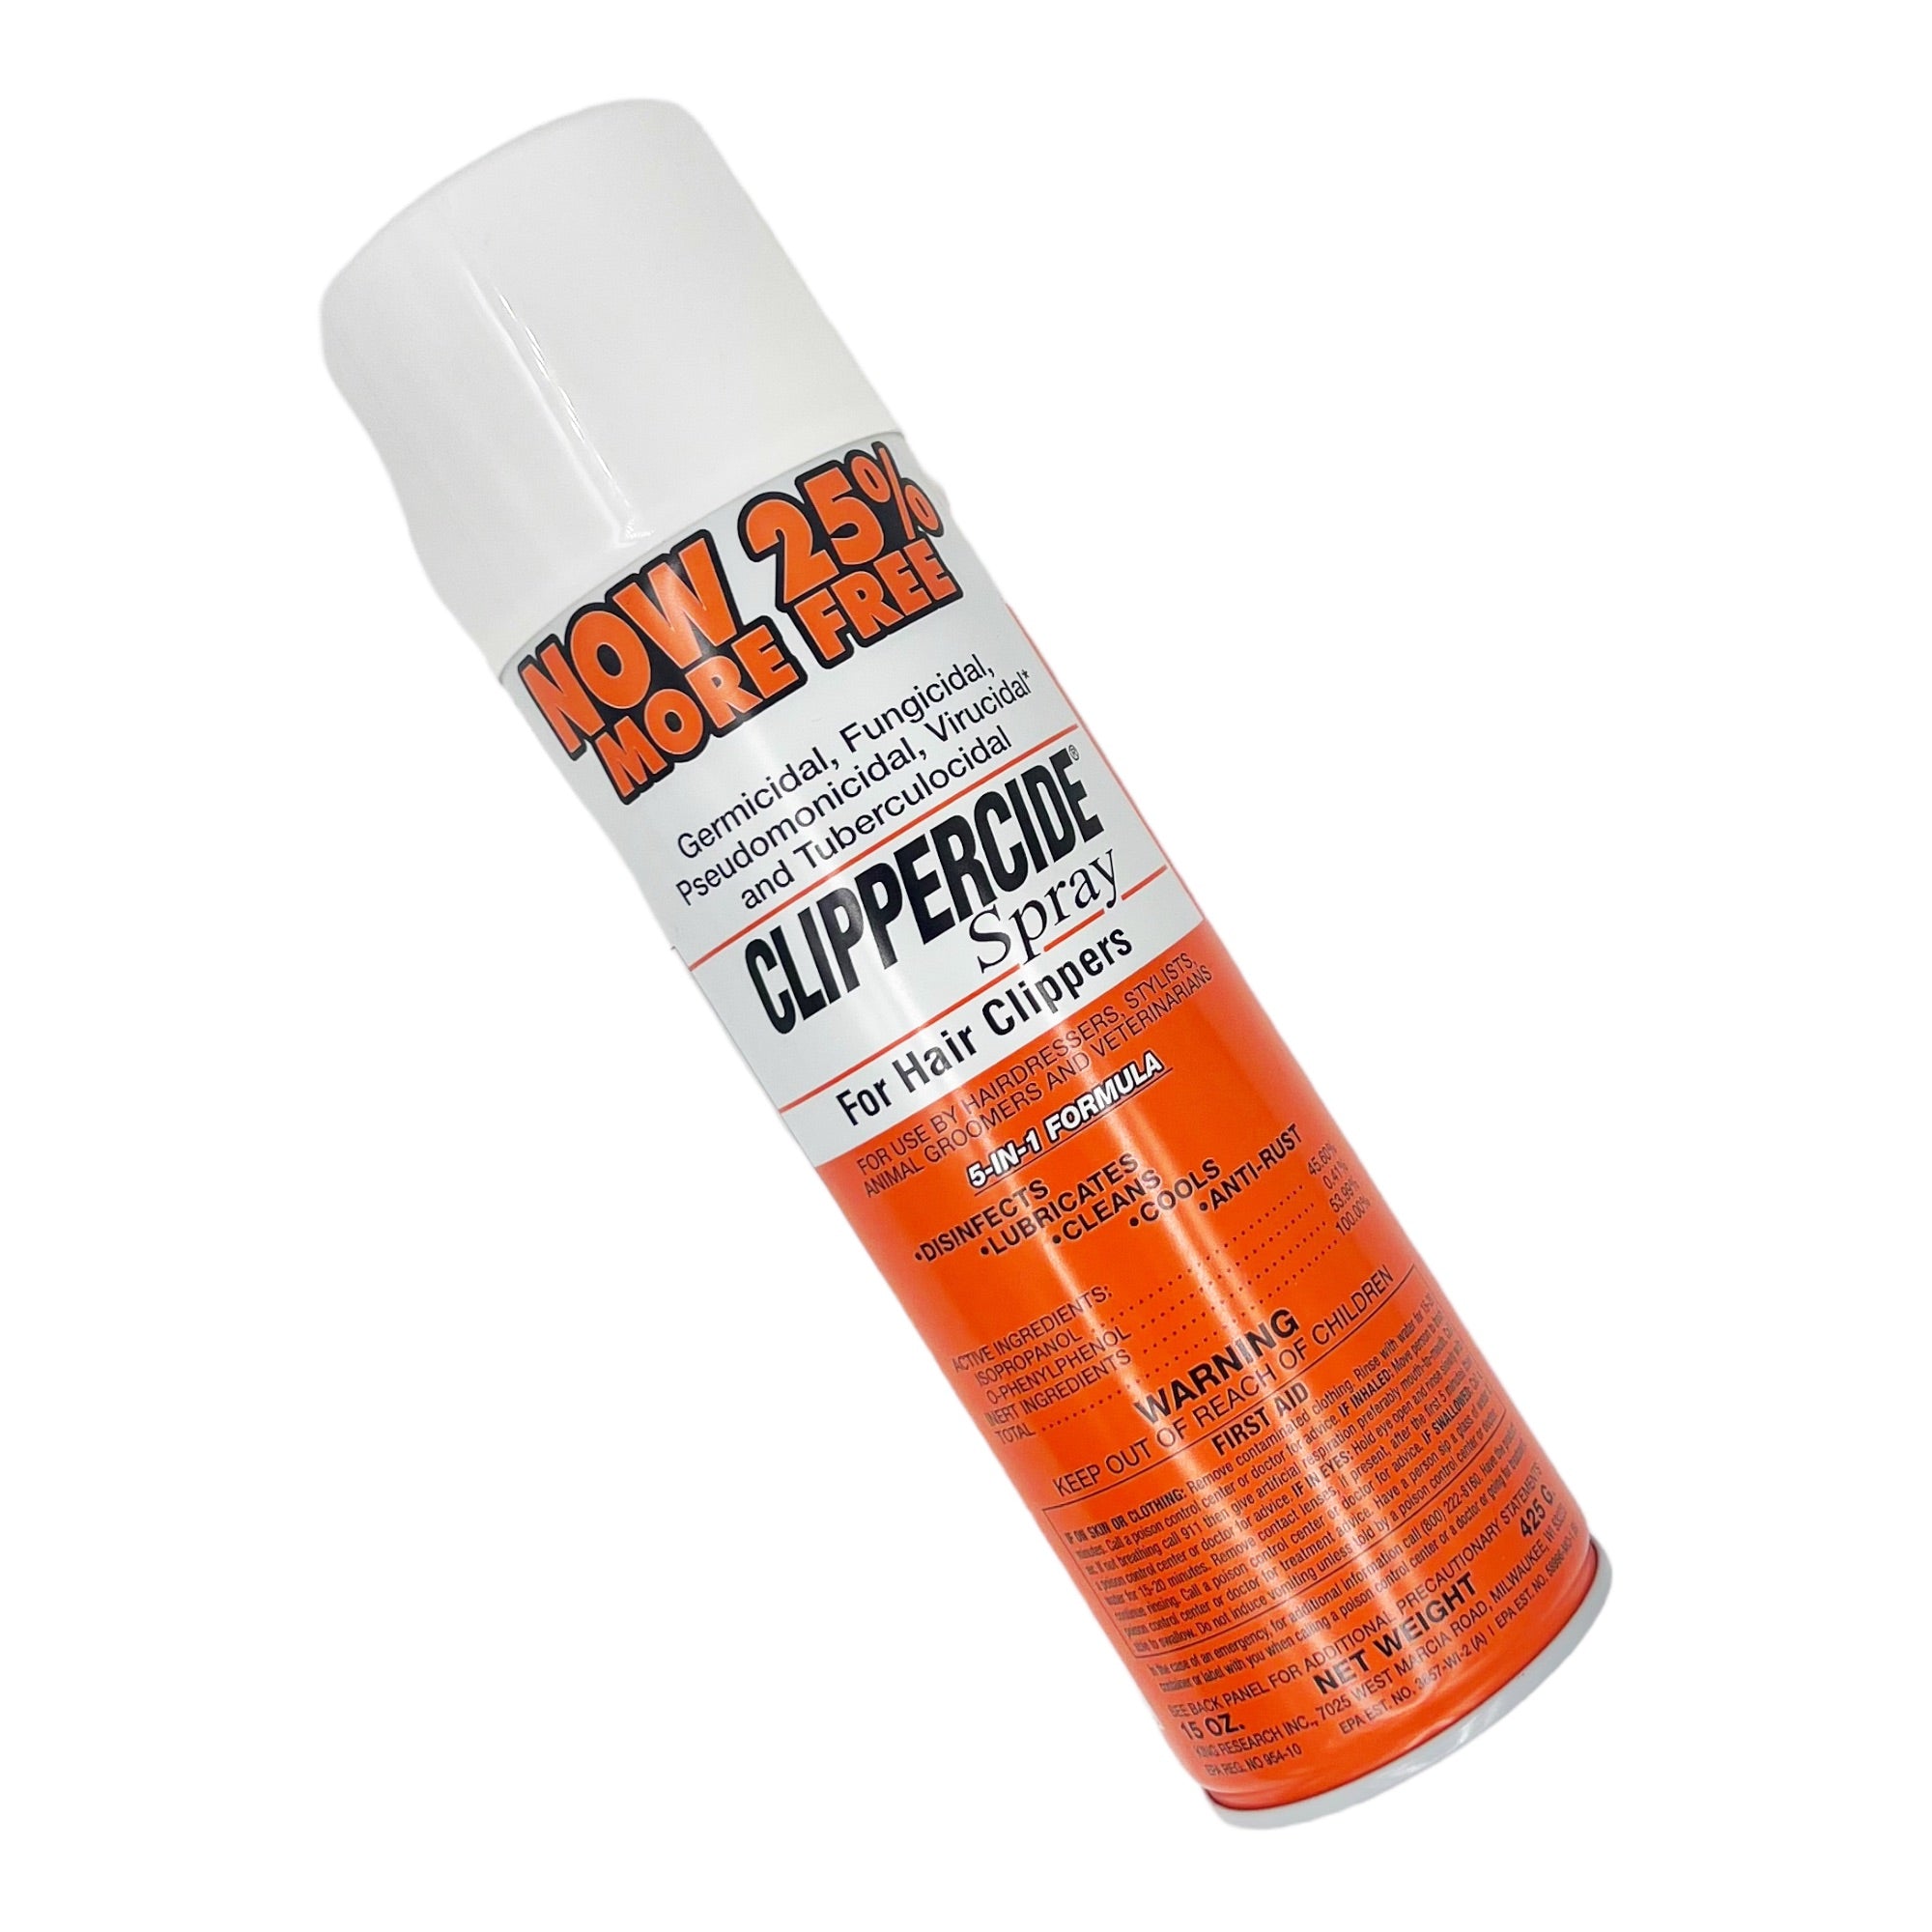 Clippercide - Spray for Hair Clippers 5-in-1 Formula 425g